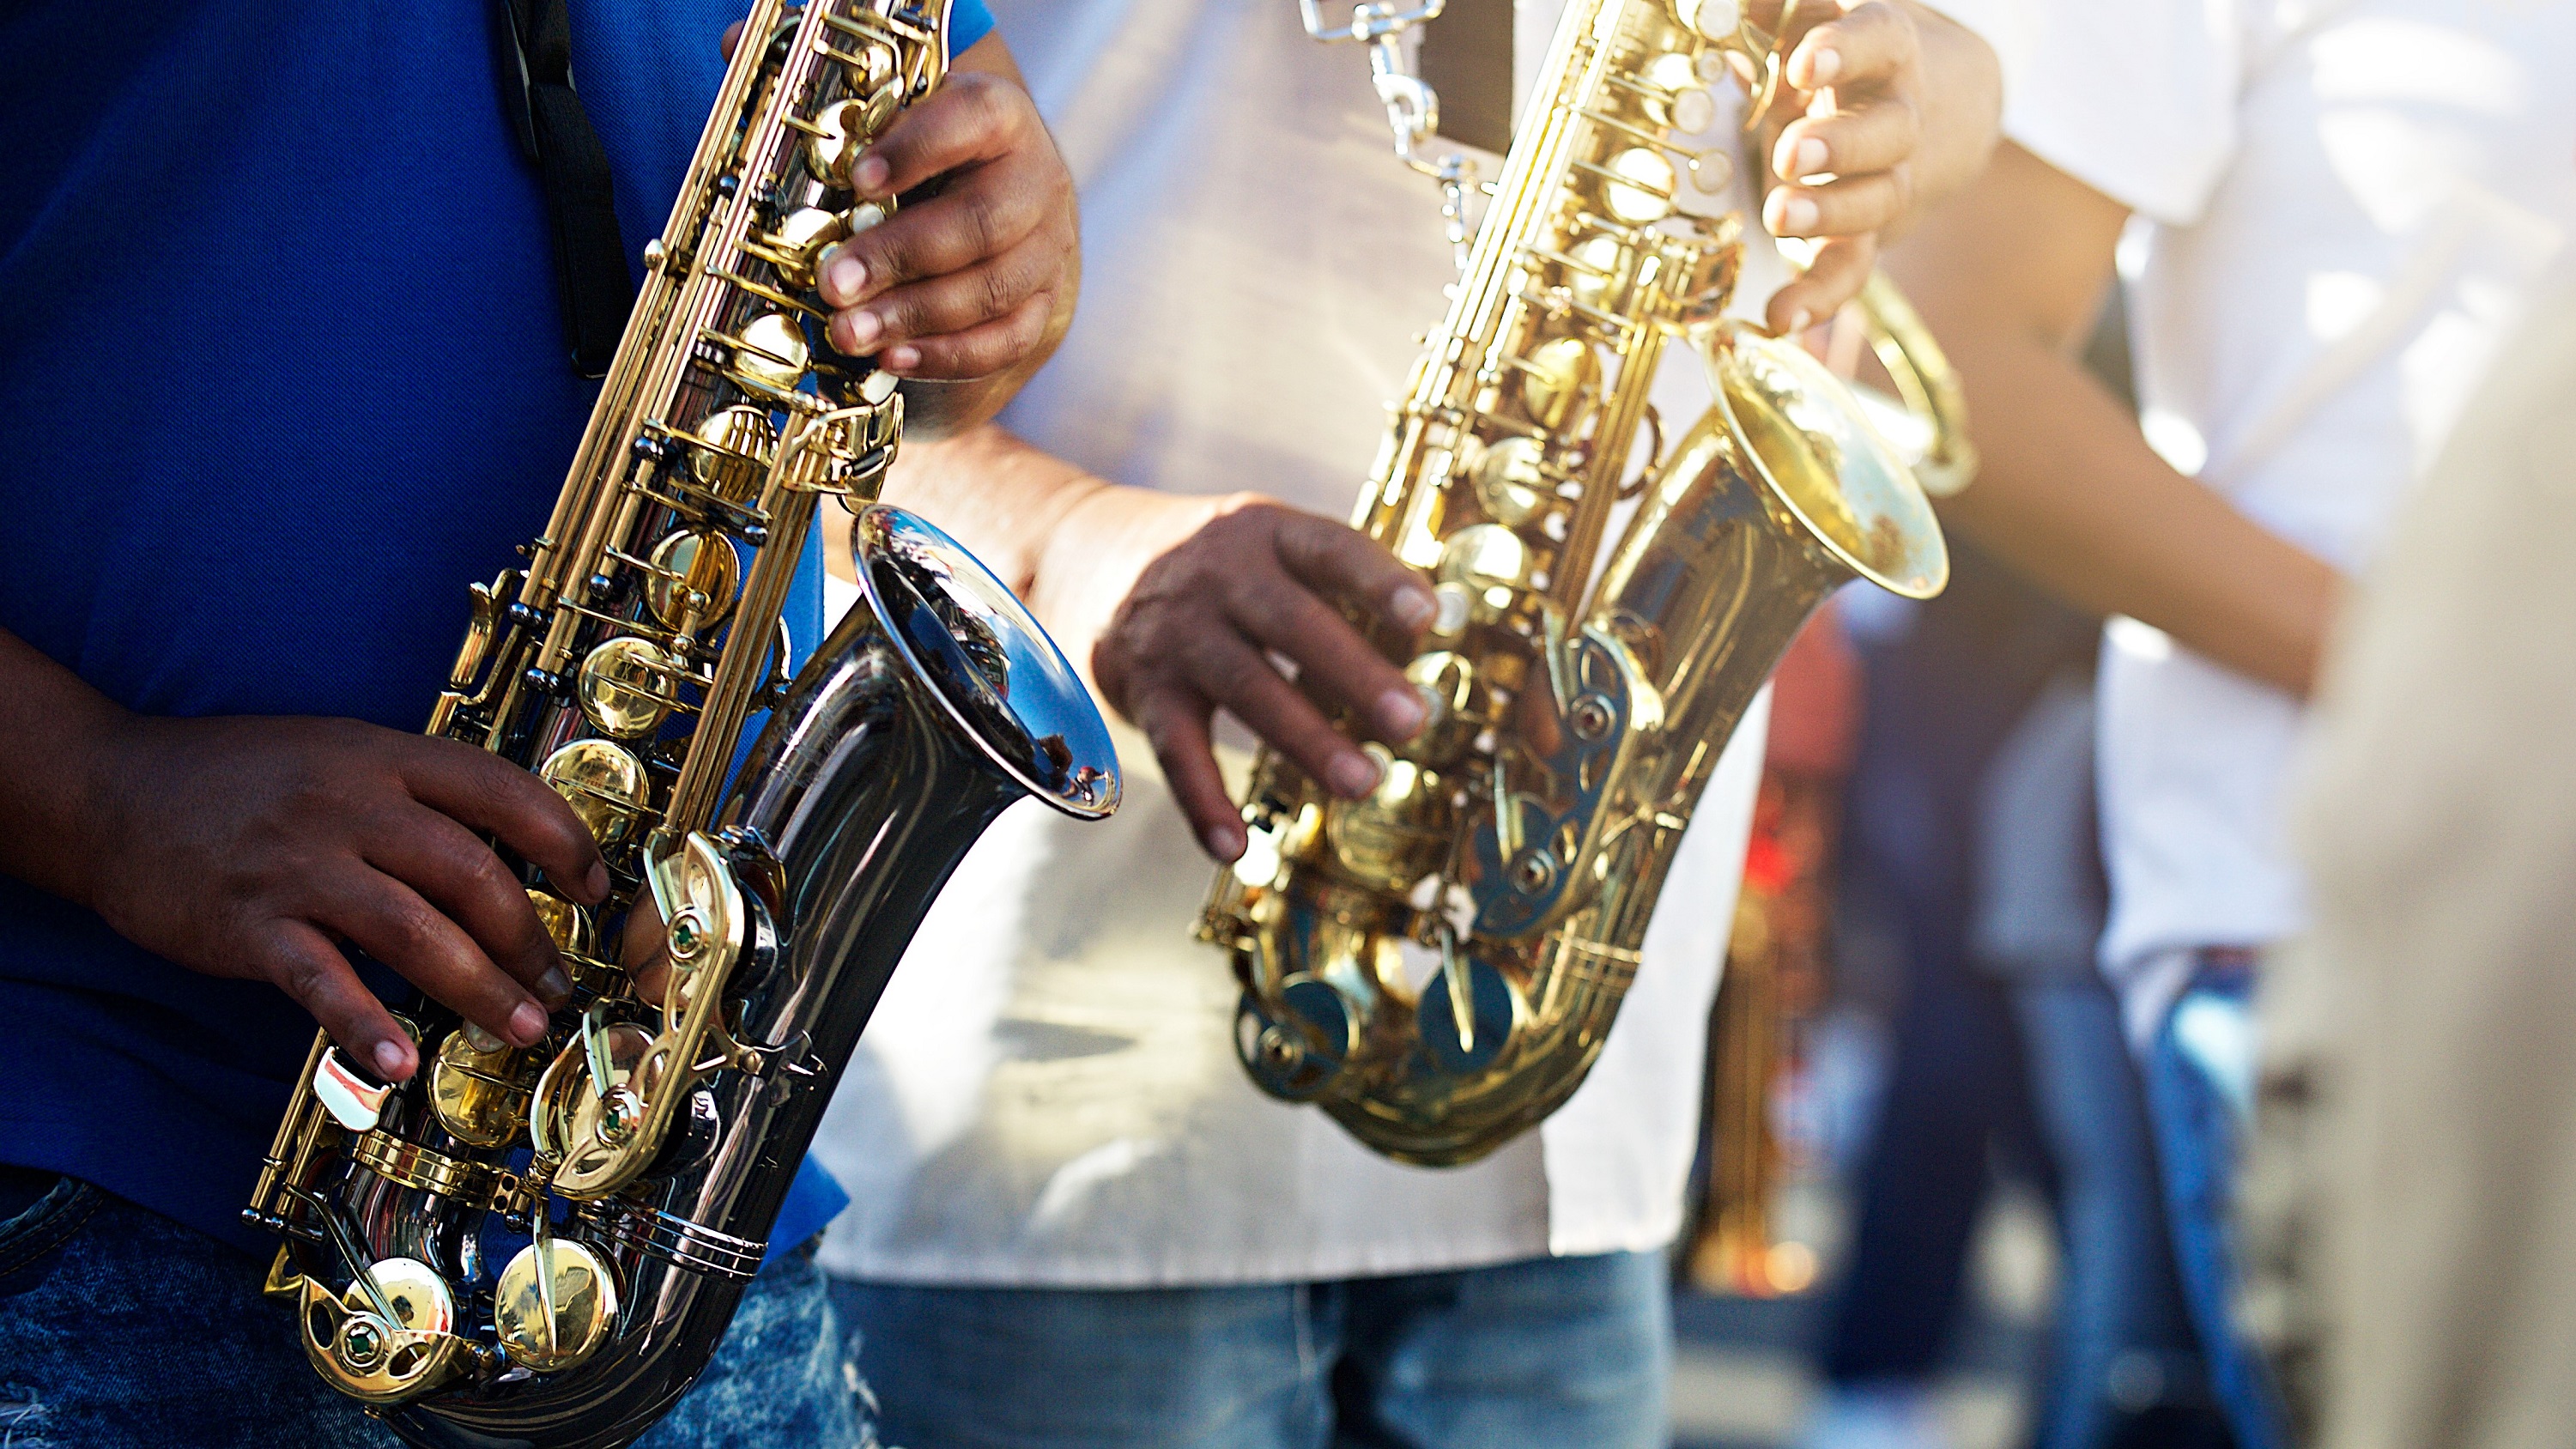 BIO: Jazz is auditioning new bandmates in an M&A market ripe with talent